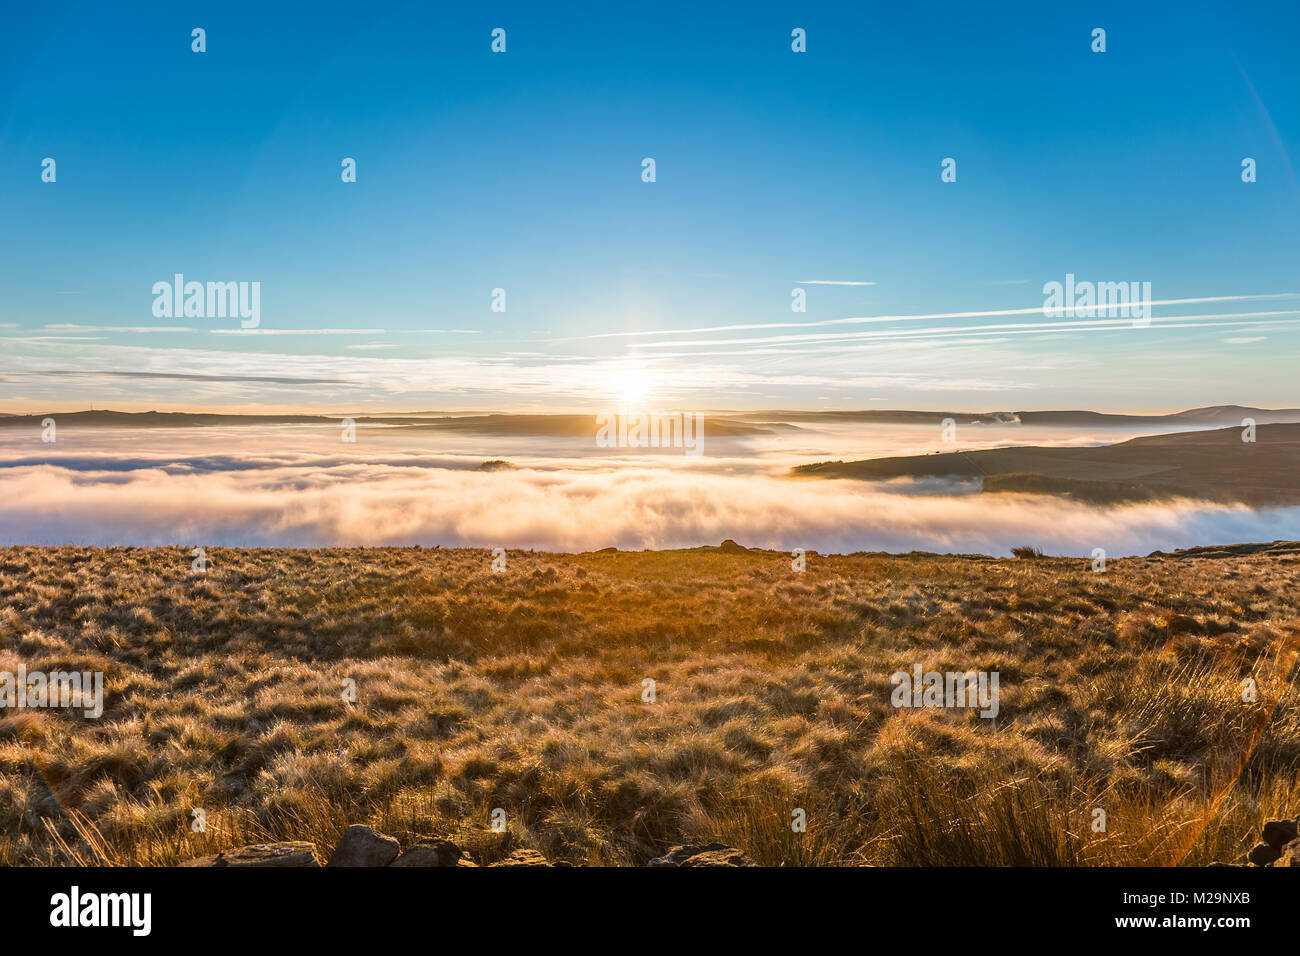 Fantastic view on a foggy and sunny day at the District National Park. The mountain peaks are visible through the fog that extends beyond the horizon. Stock Photo